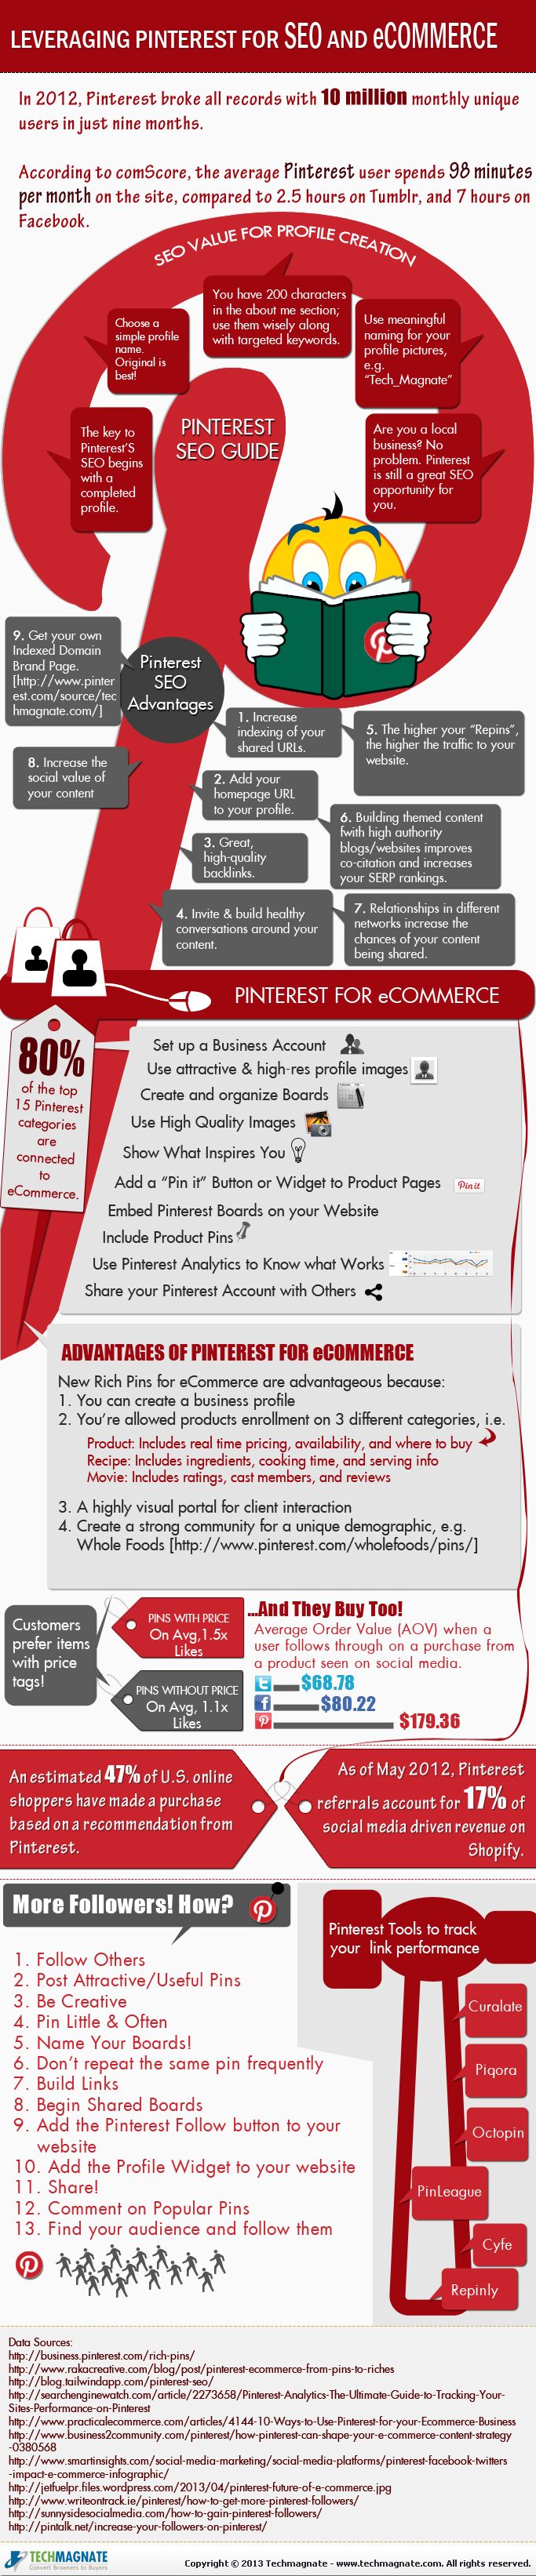 Leverage Pinterest For SEO Infographic